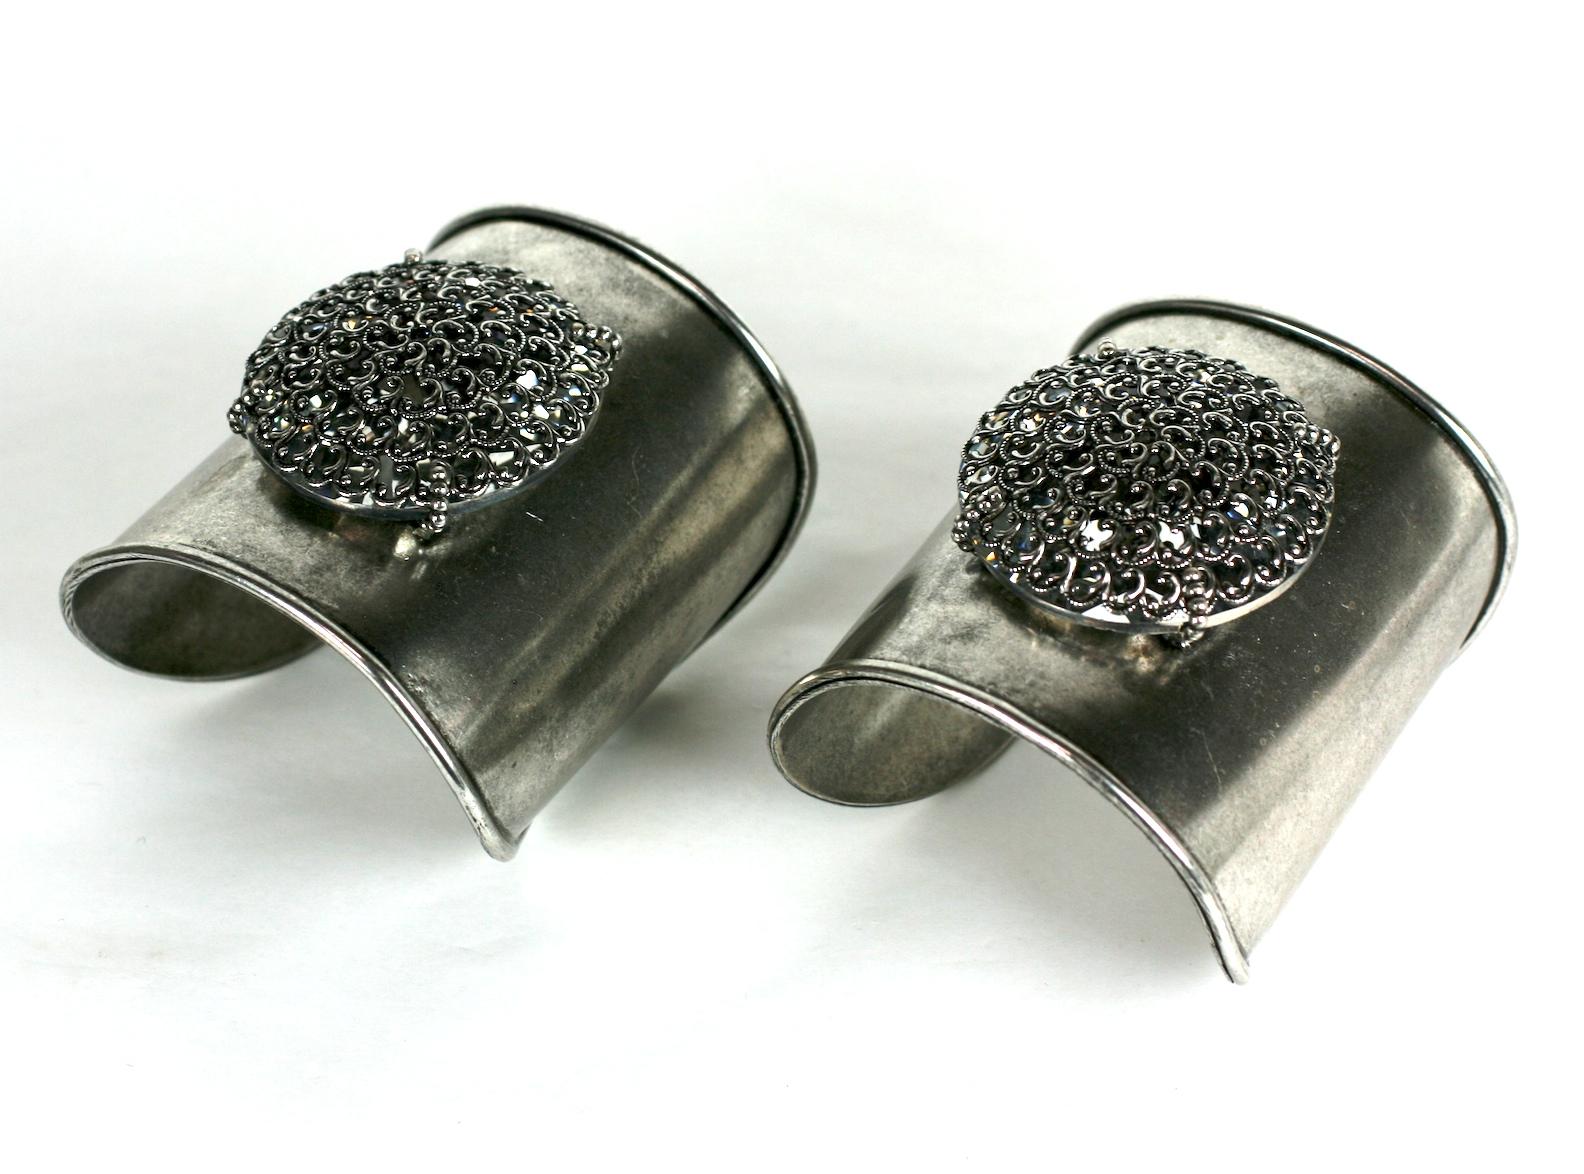 Important Maison Goossens for Yves Saint Laurent artisan crystal cuffs. Hand crafted of antiqued silver plated bronze with huge faceted round crystals, each caged under an intricate pierced filigree dome. Very striking and chic, yet subtle as the